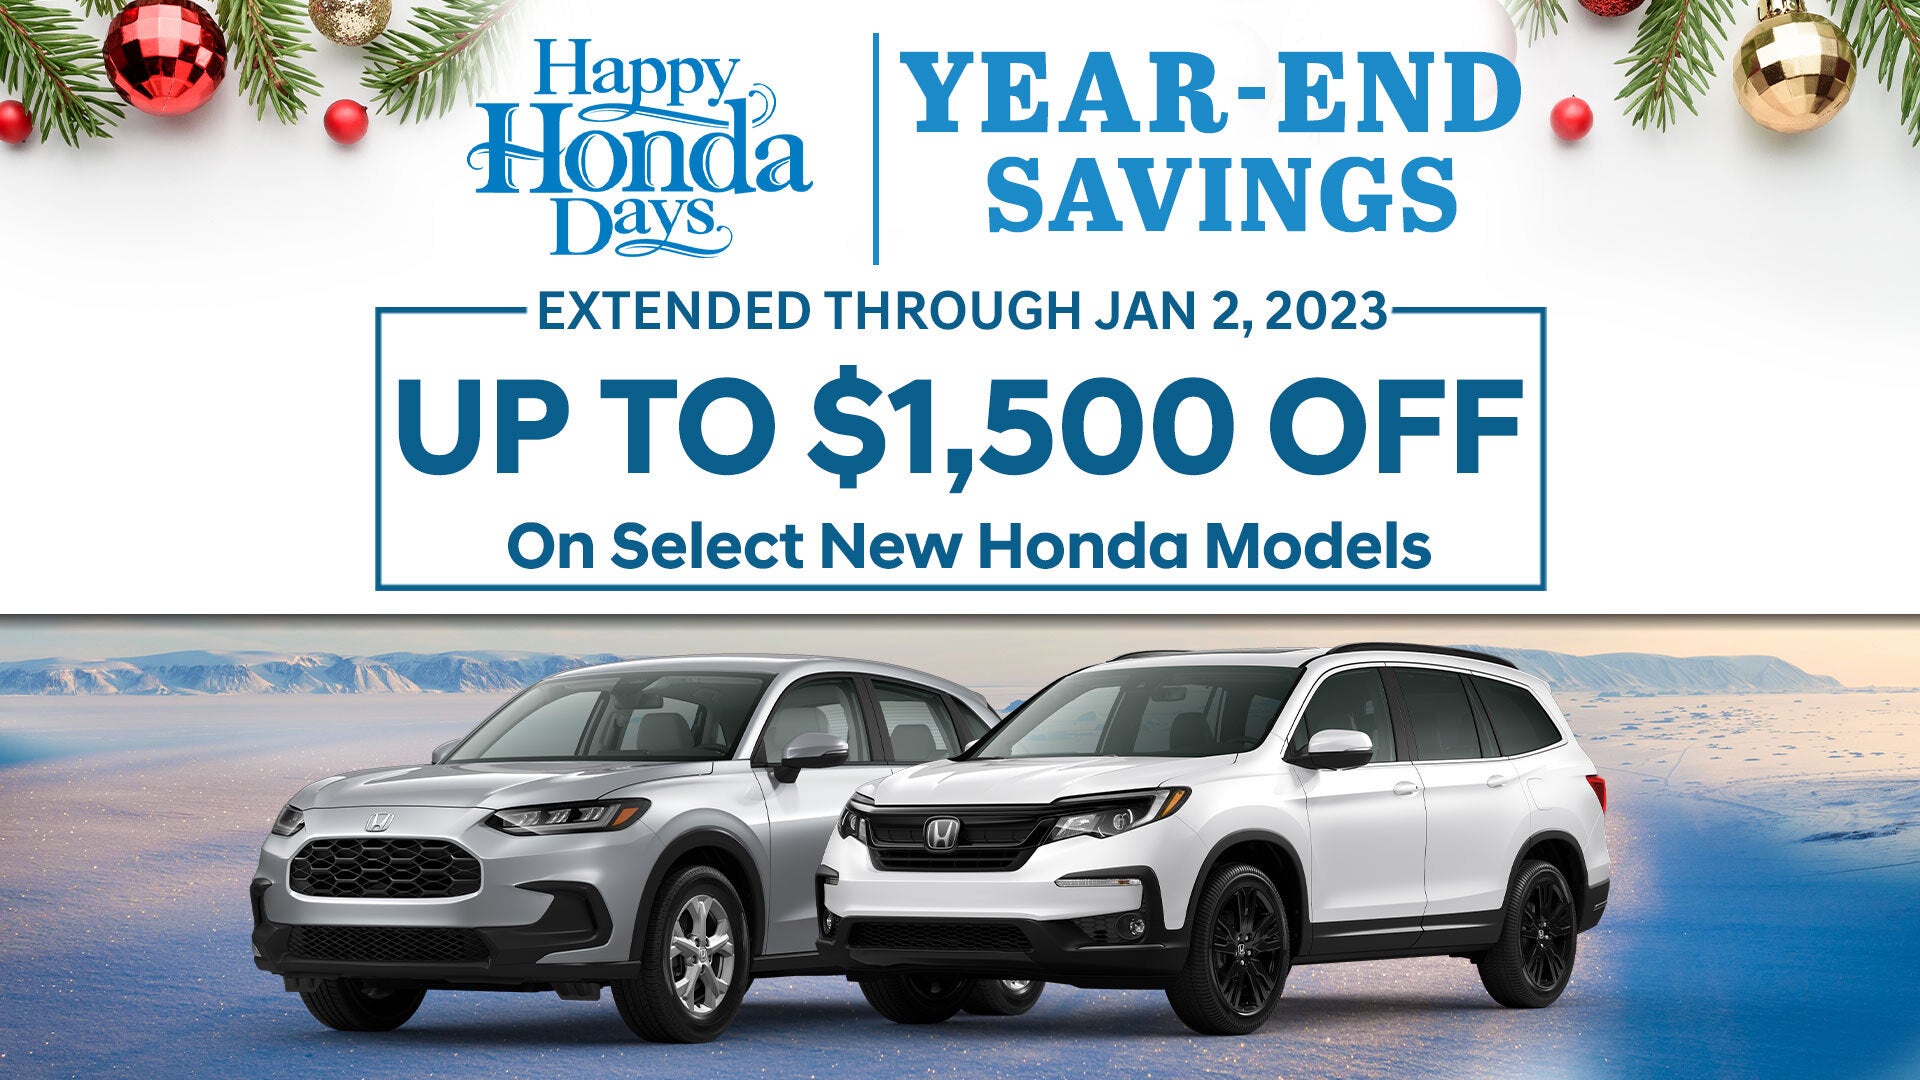 Up to $1,500 off Our Best Price on select new Honda models